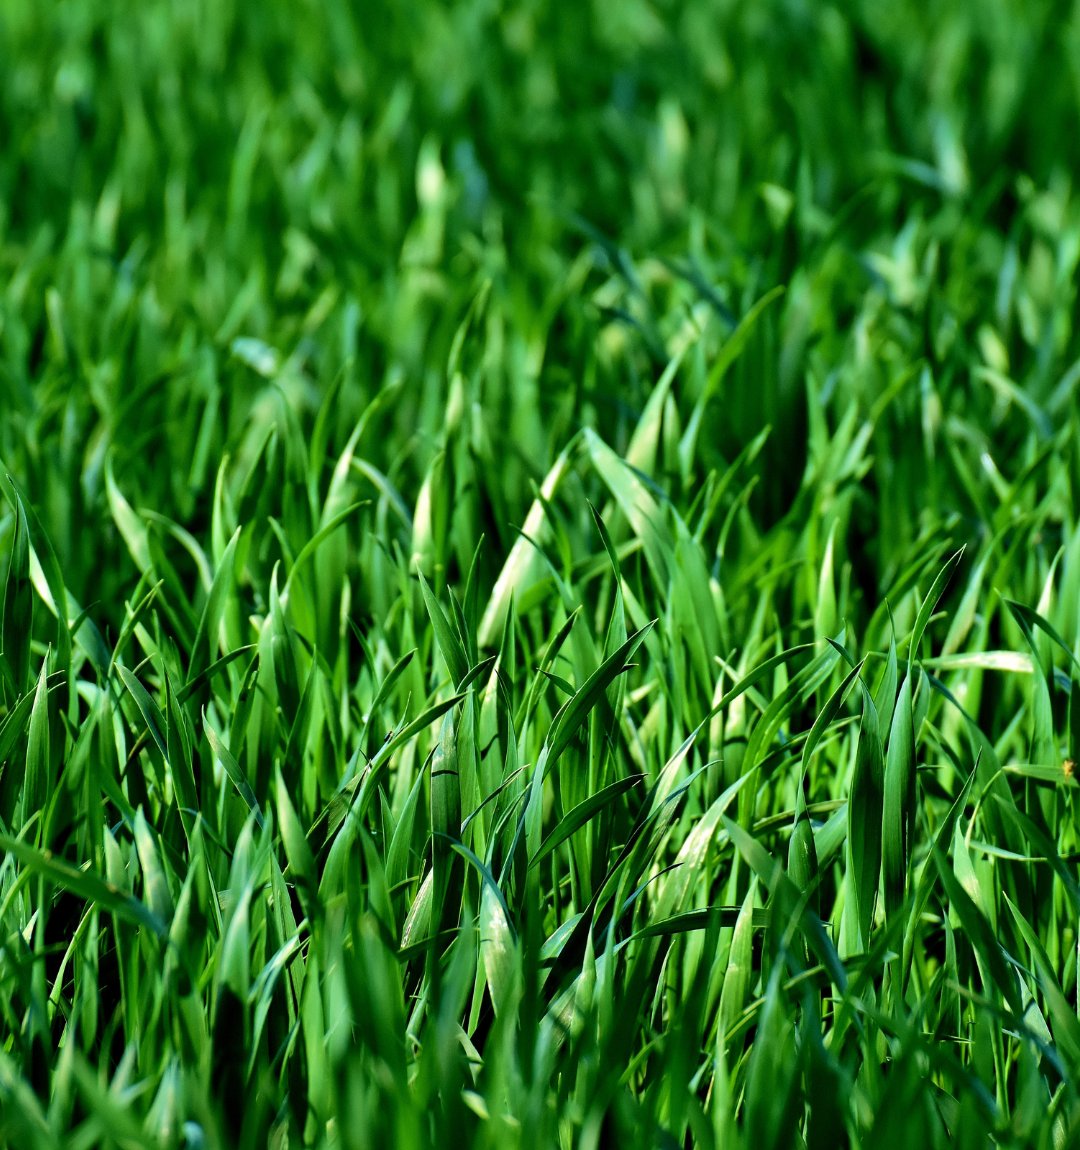 Ready to make your lawn the envy of the neighborhood in 2024? Set your #LawnGoals with Greensward, and let's get started! 💪

Now's the perfect time for soil testing and winter weed treatments. Let's turn those lawn dreams into reality!  

#KeepItGreen 🌱
#NewYearNewLawn